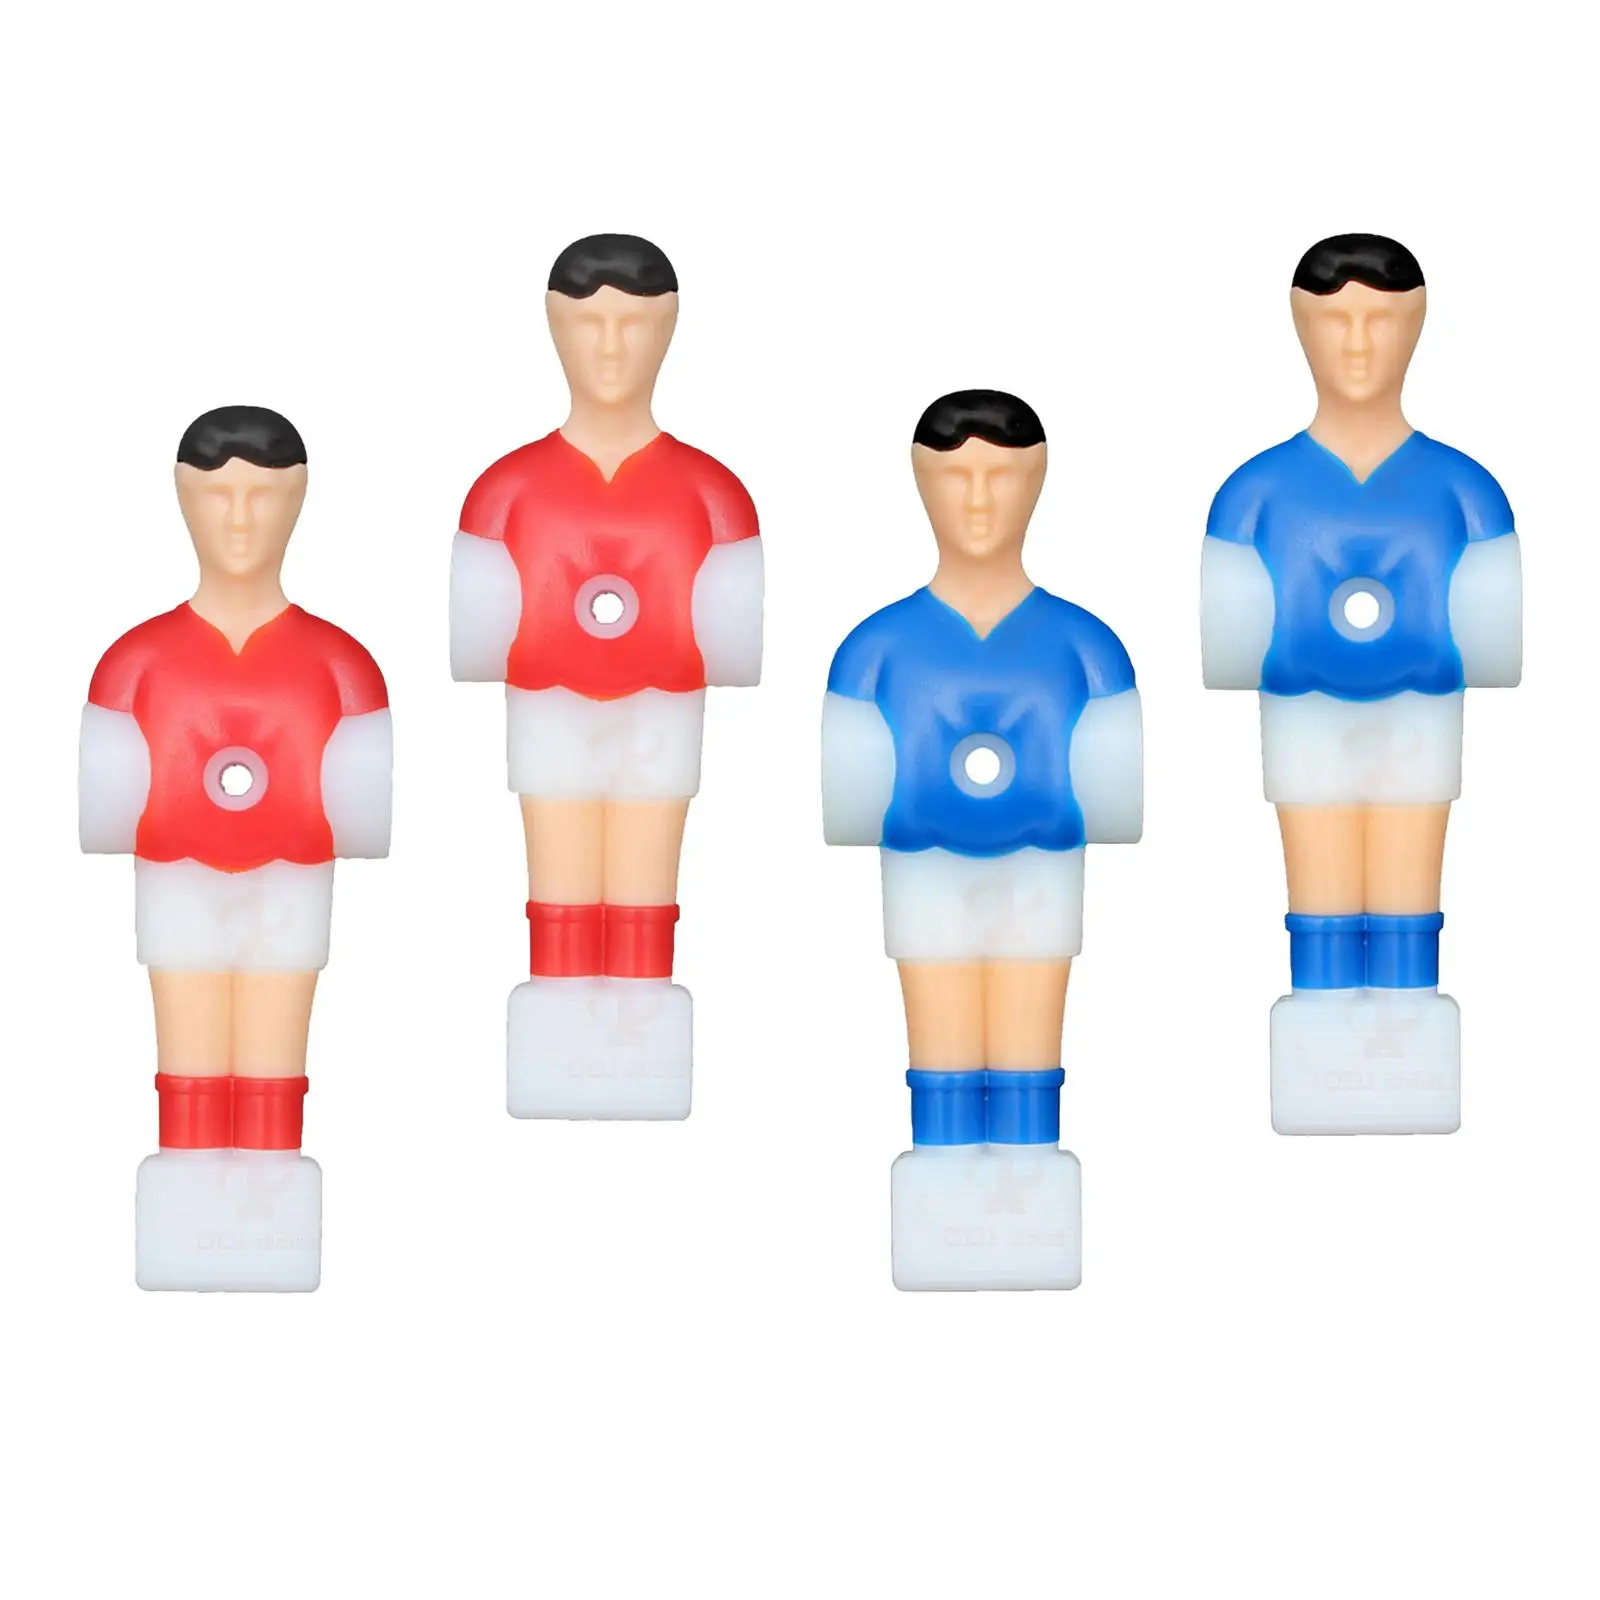 4Pcs Foosball Men Table Foosball Player Replacement Parts Table Football Men Mini Doll Table Football Machine Accessory Parts